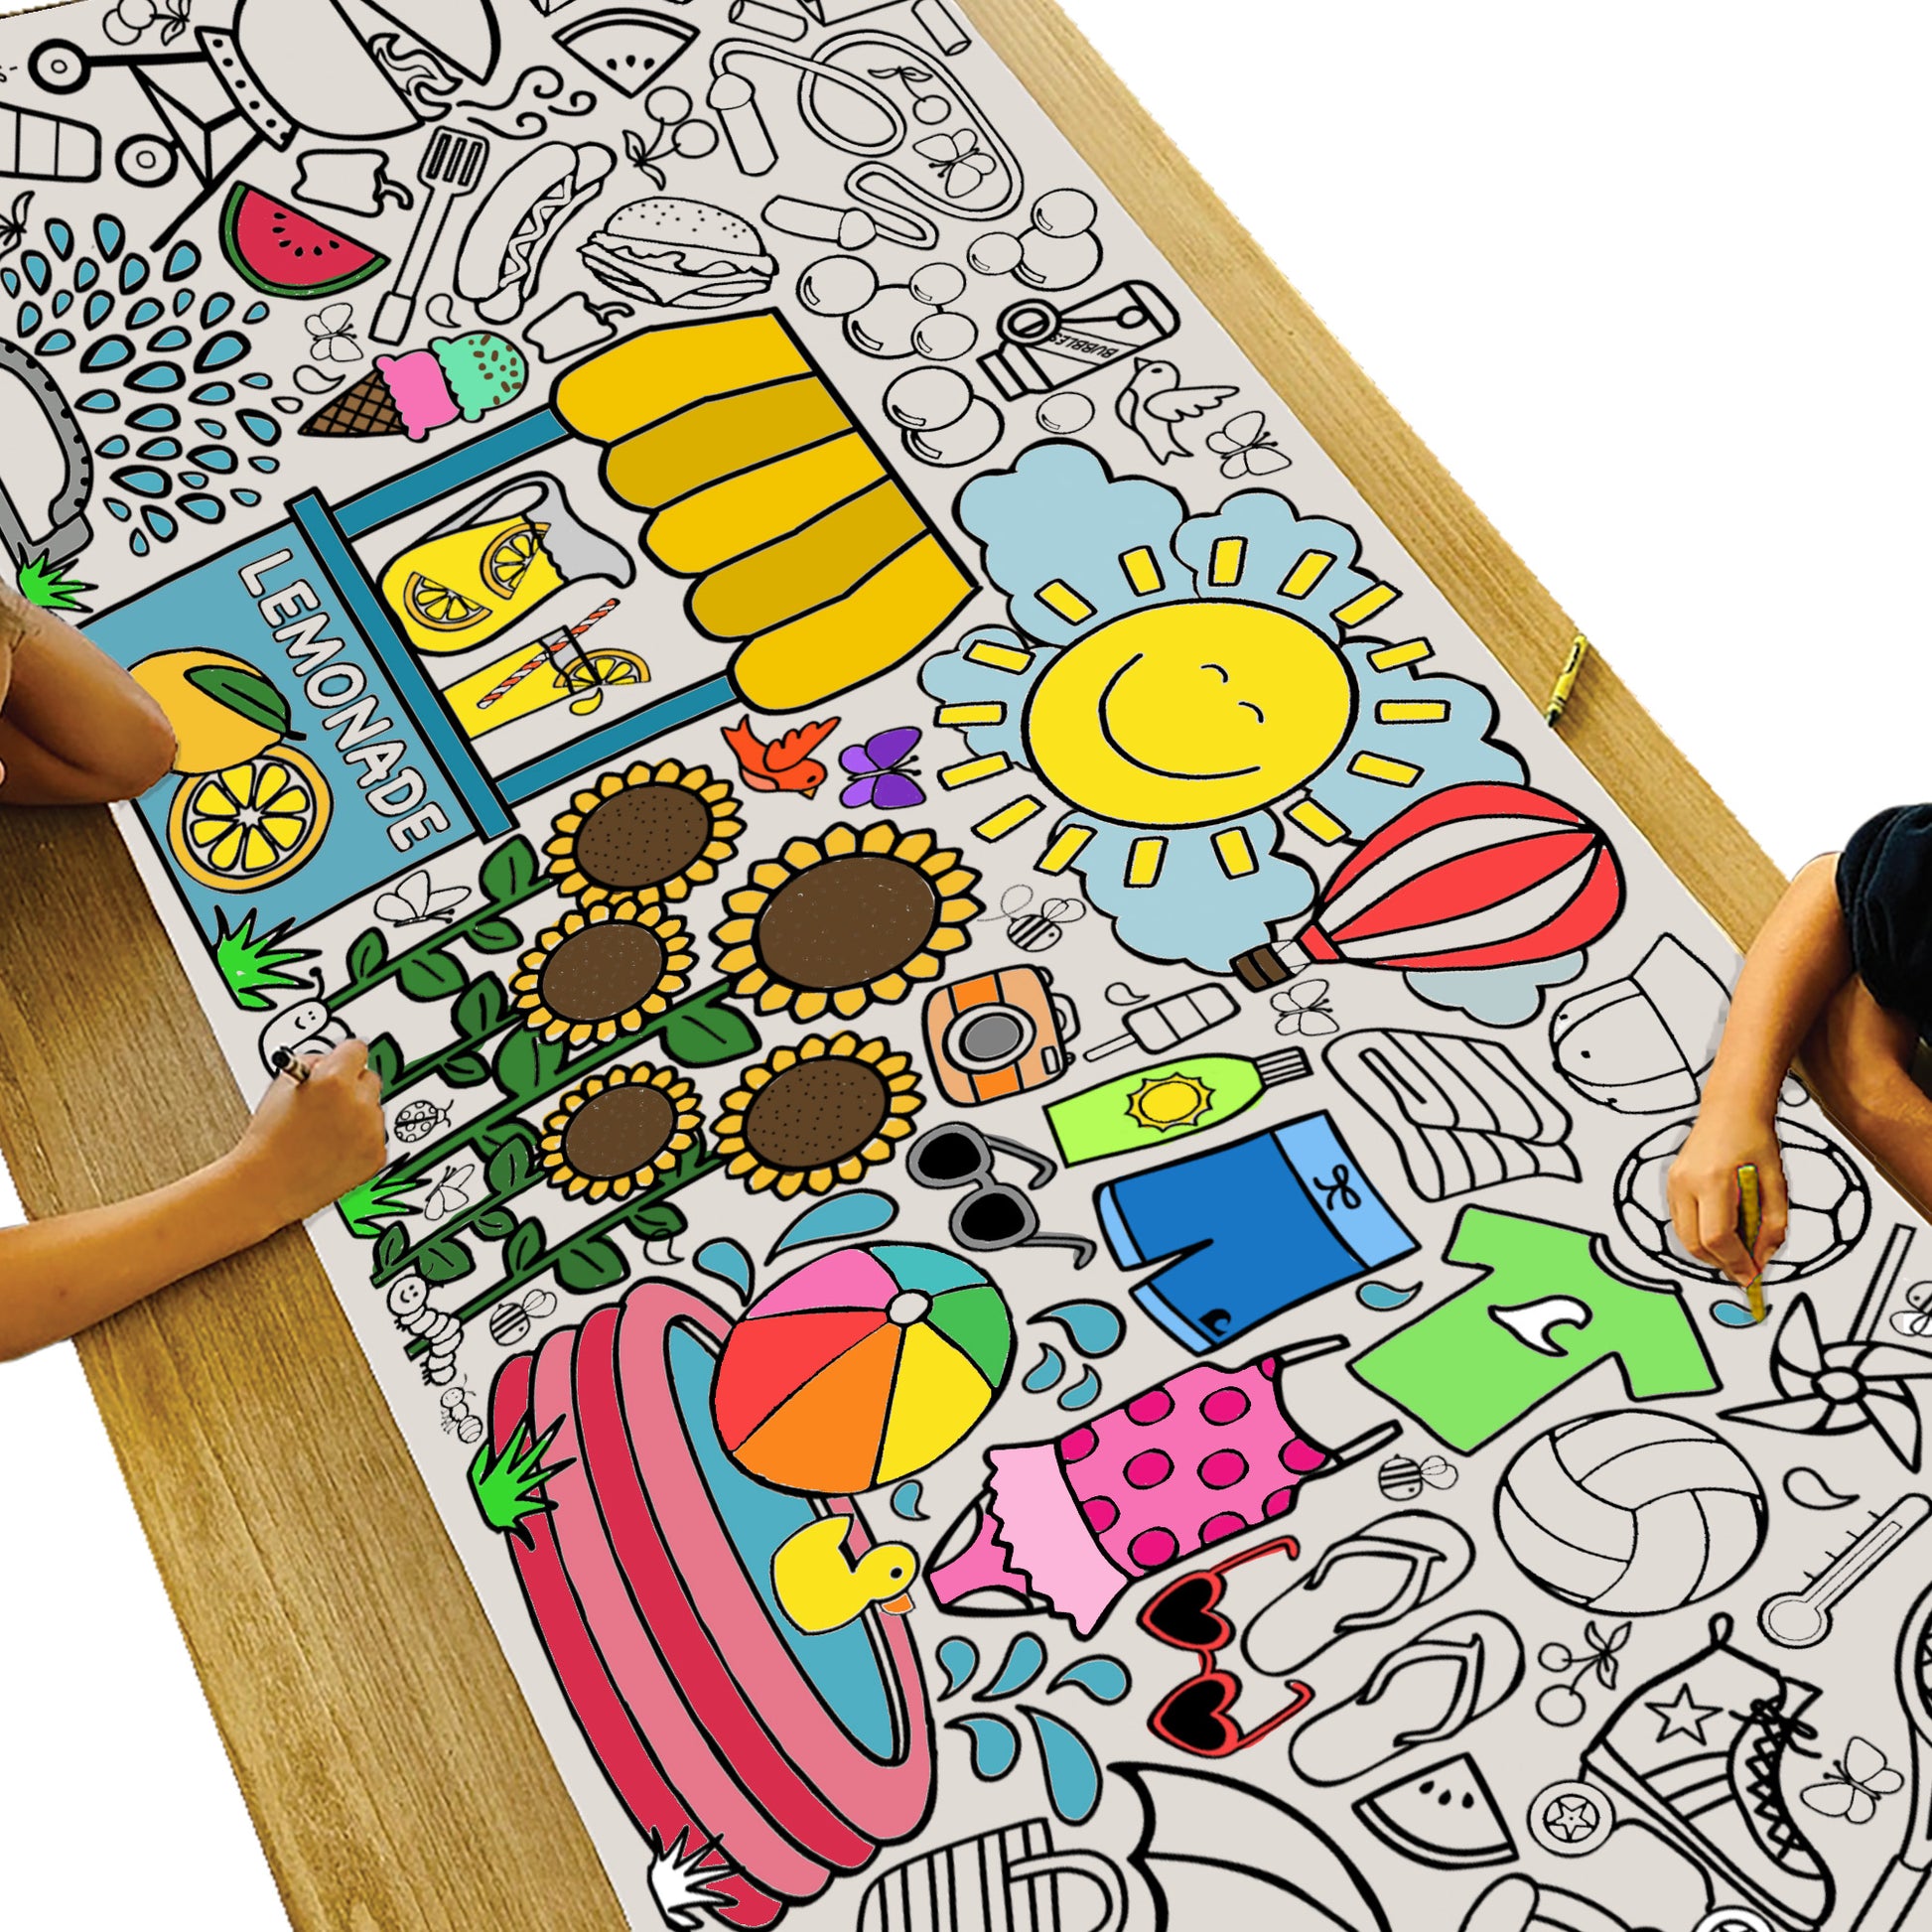 Omy – Giant Coloring Poster – USA